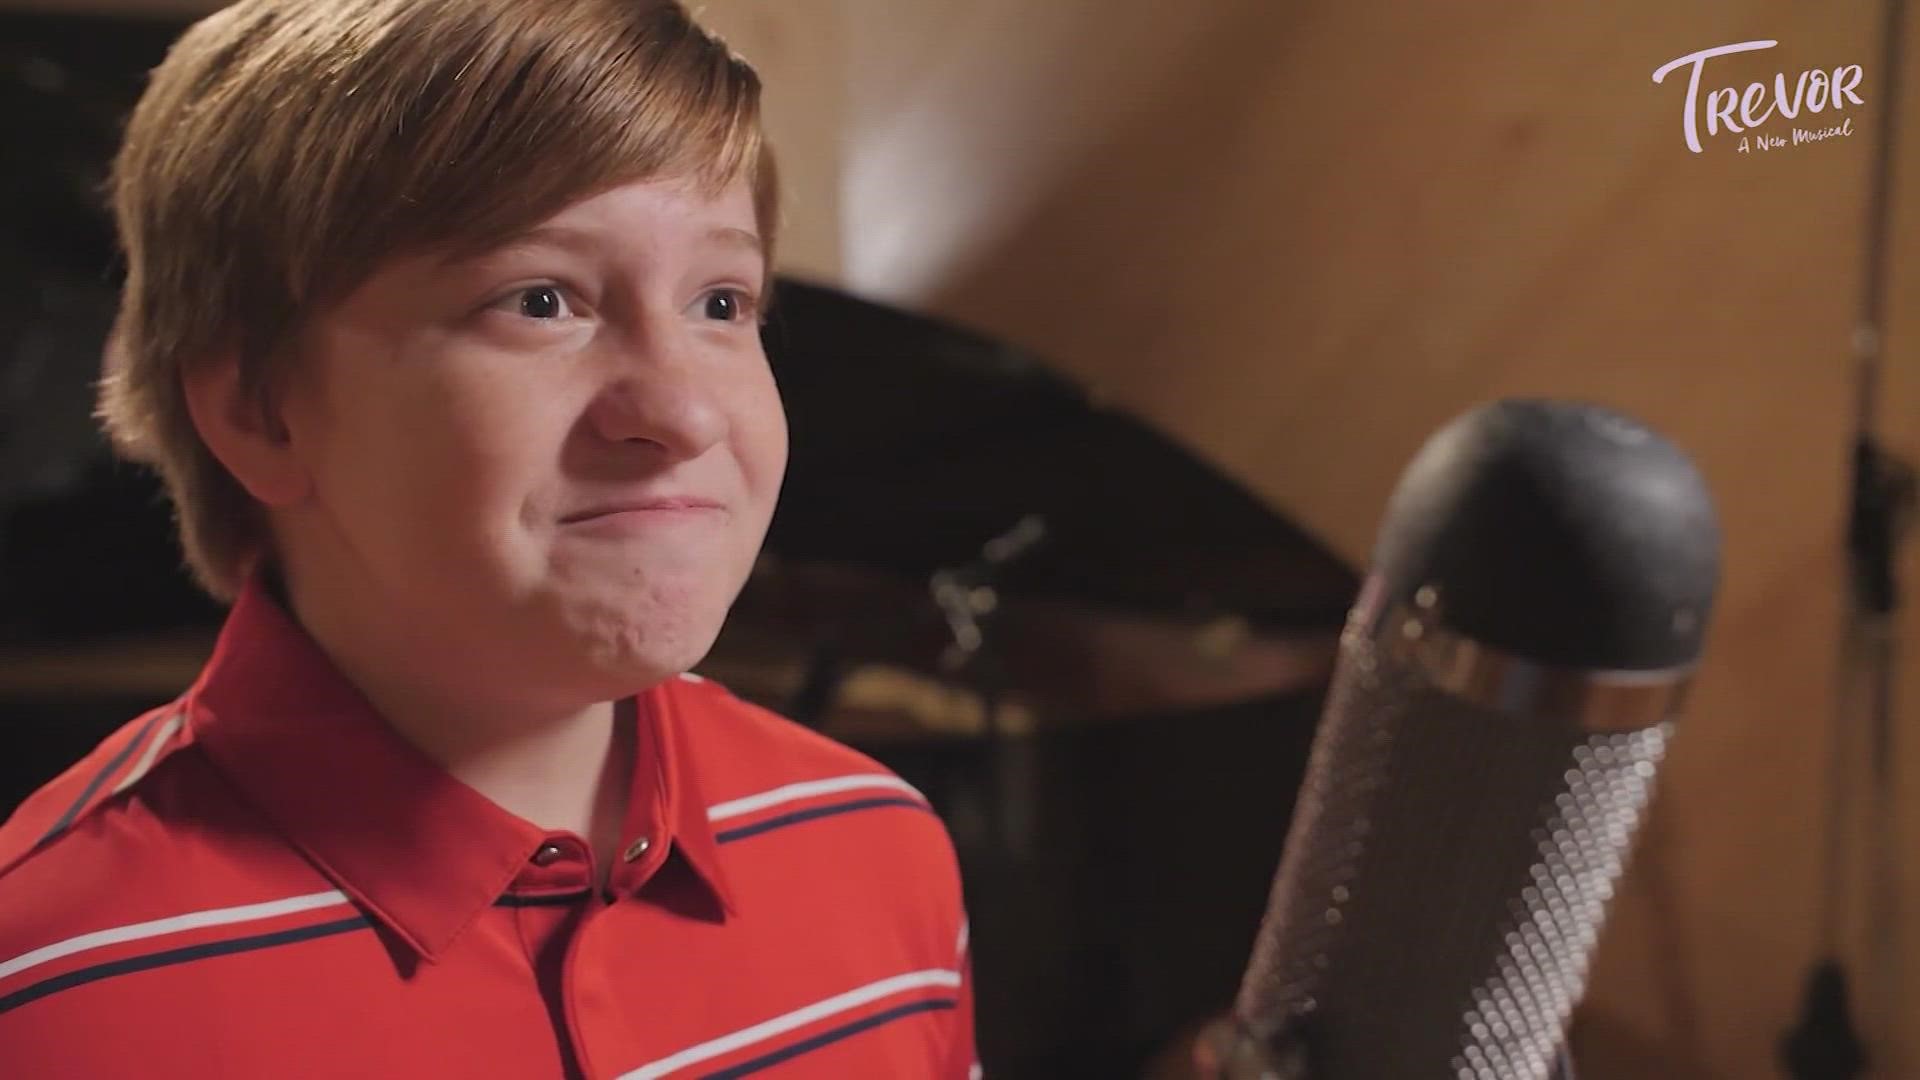 Holden Hagelberger, 13, is starring in "Trevor: A New Musical."